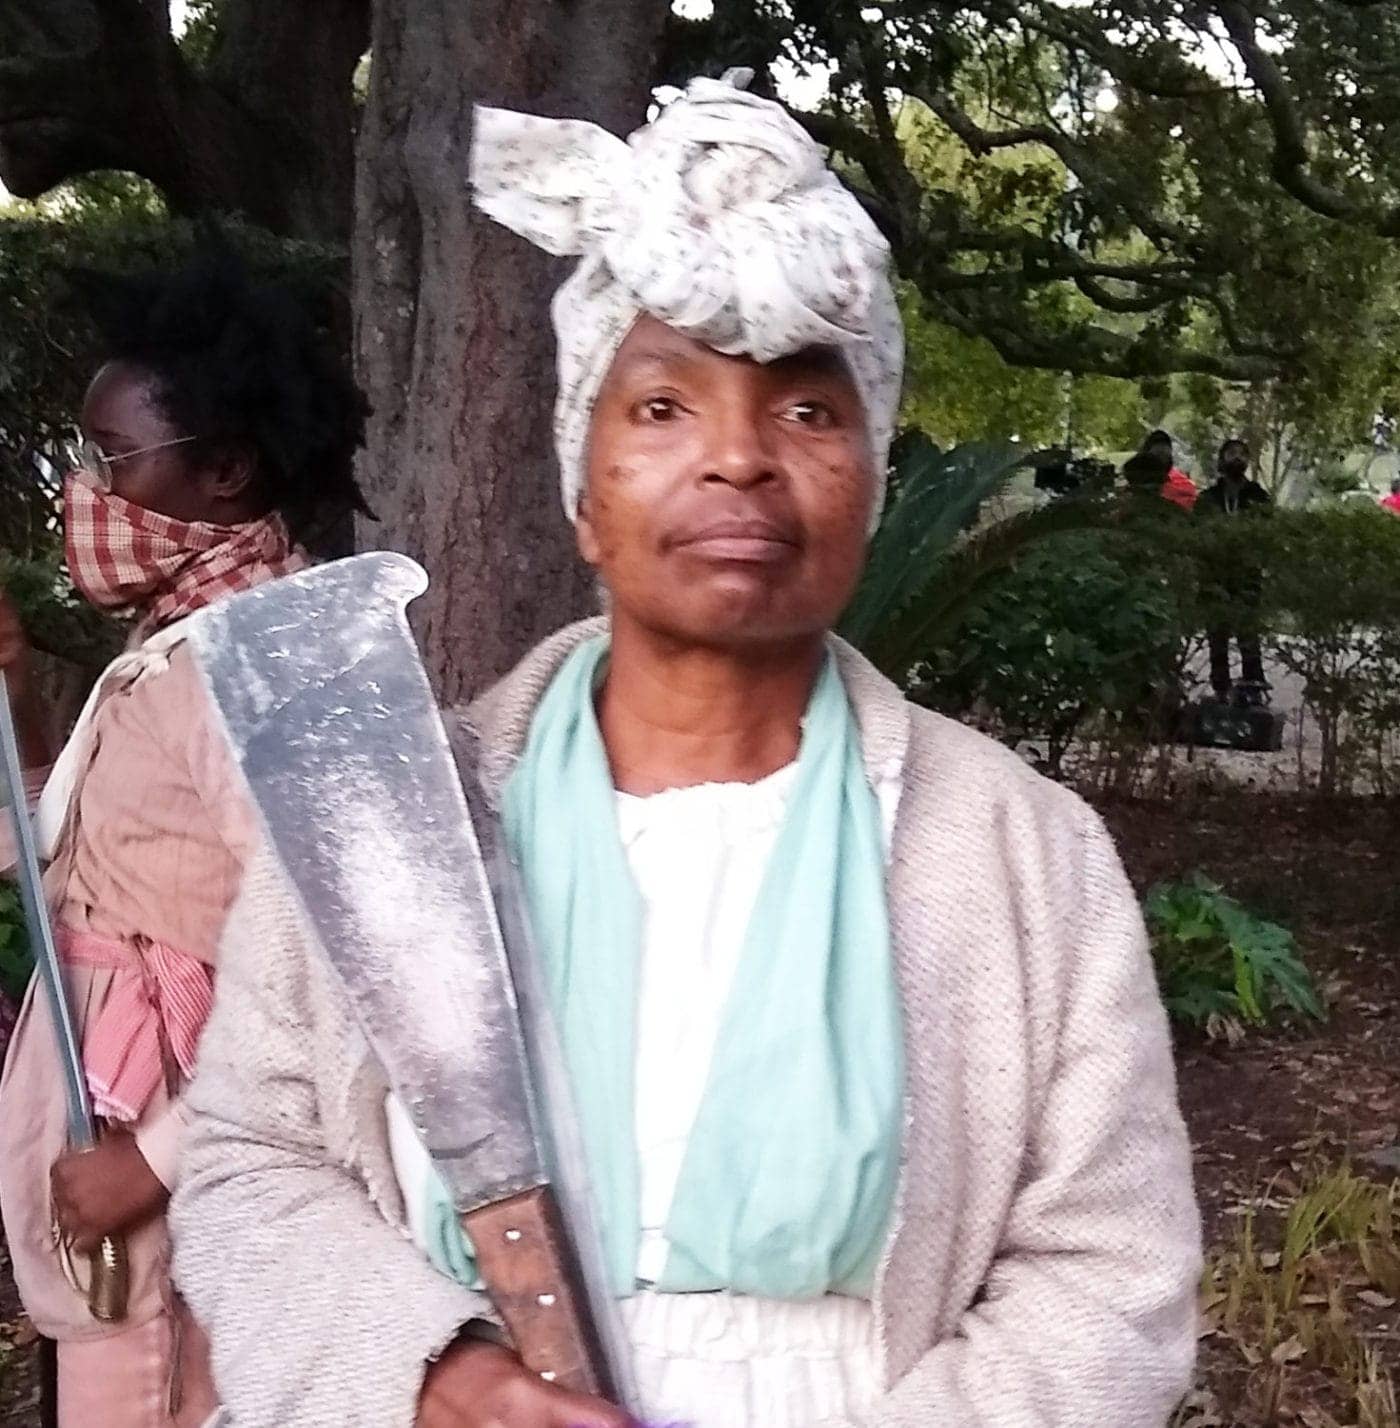 Slave-Rebellion-Reenactment-Army-member-Wanda-in-Congo-Square-after-victory-celebration-110919-by-Wanda-cropped-1400x1428, An epiphany – the largest slave insurrection in US history, Culture Currents 